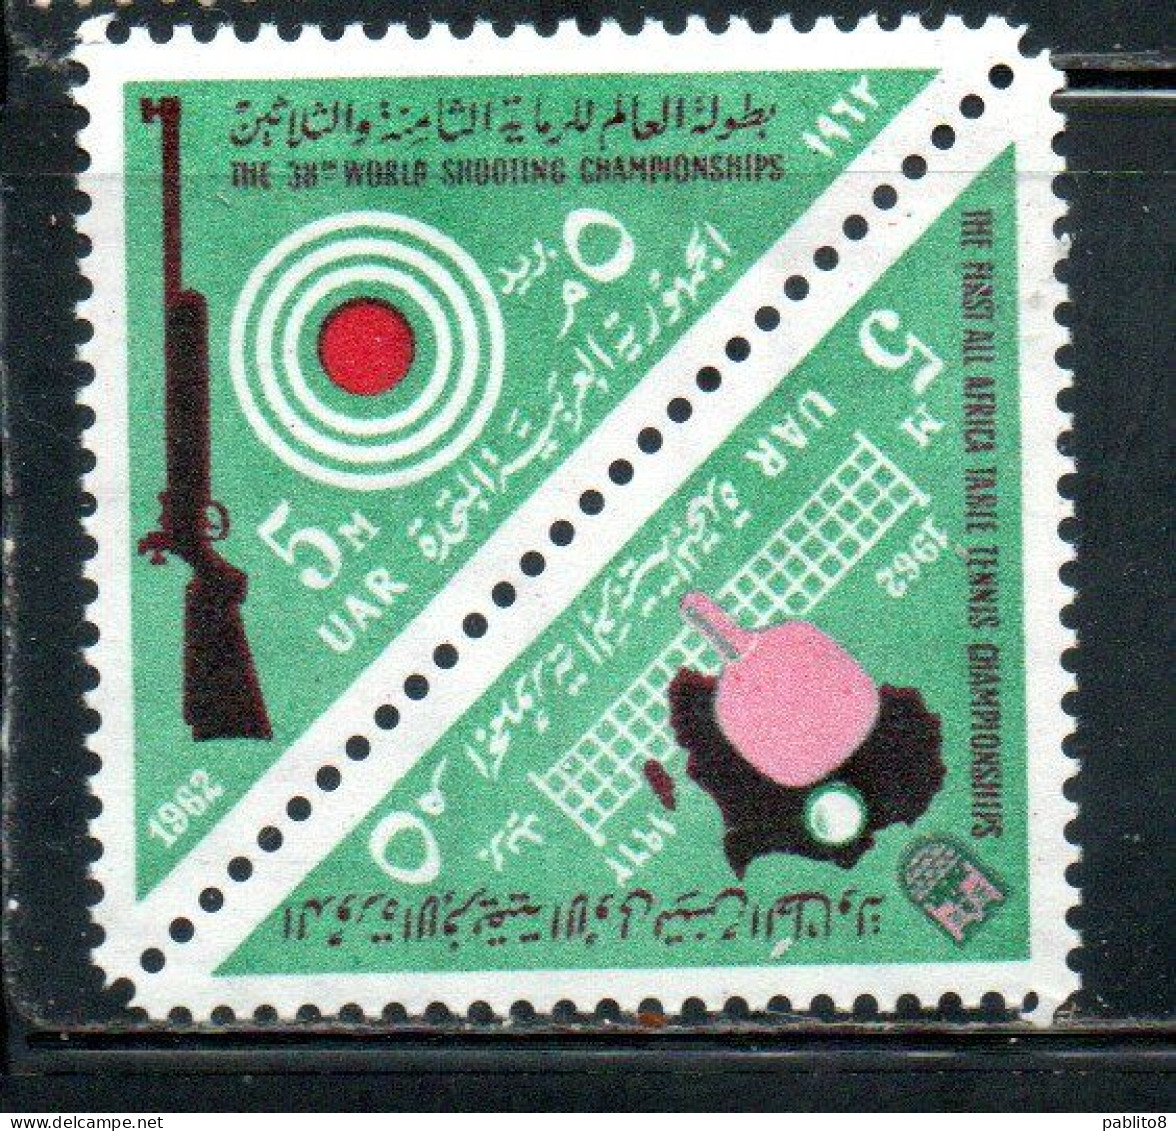 UAR EGYPT EGITTO 1962 WORLD SHOOTING CHAMPIONSHIPS AND AFRICAN TABLE TENNIS TOURNAMENT 5m MNH - Unused Stamps